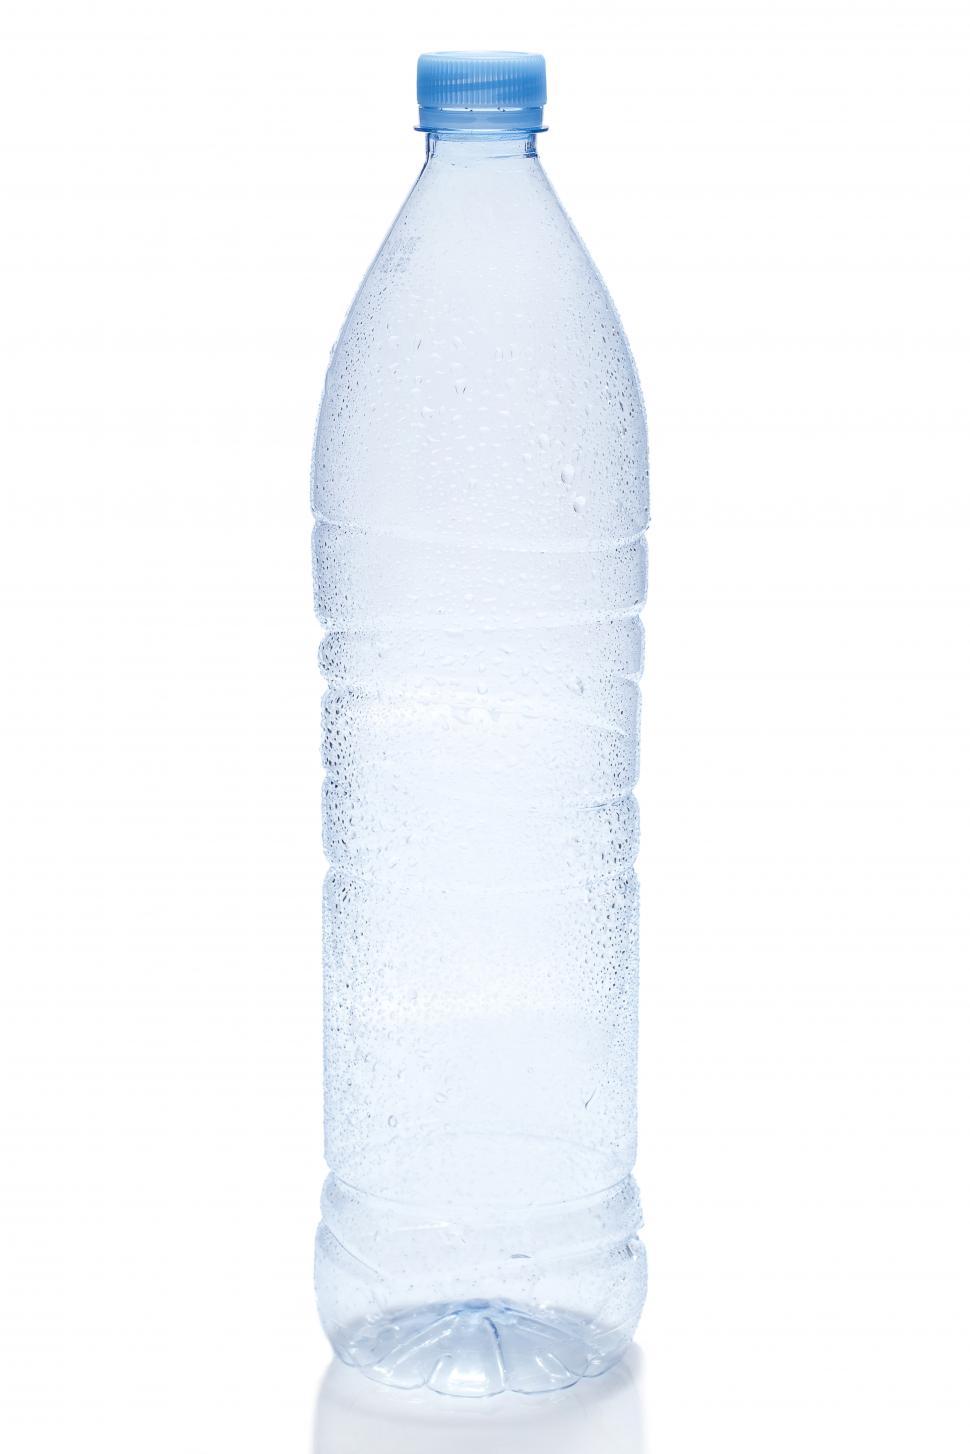 Free Stock Photo Of One Empty Plastic Water Bottle Download Free Images And Free Illustrations